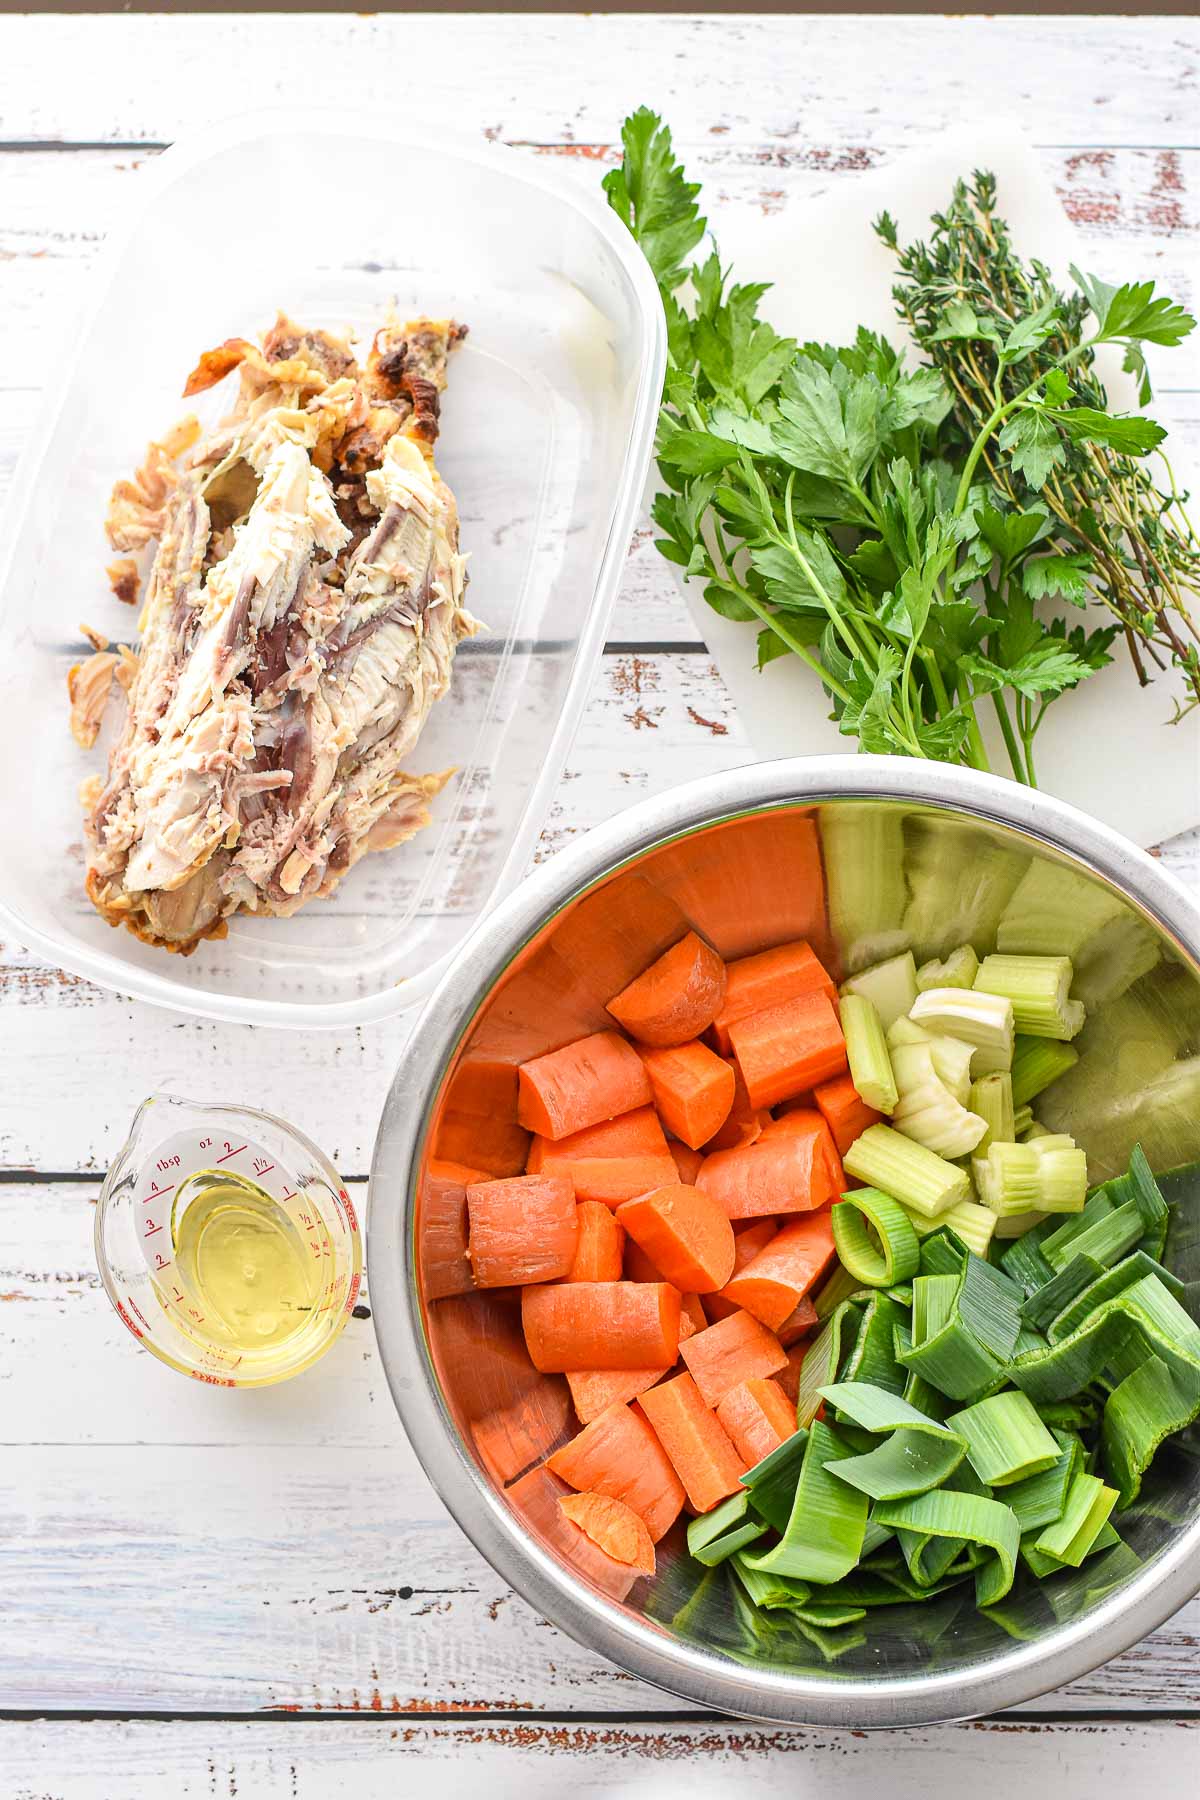 low fodmap chicken broth ingredients (photo 1 of 2) including a cooked chicken carcass, coarsely chopped carrots, celery, and leek greens, garlic-infused olive oil, and parsley and thyme sprigs.